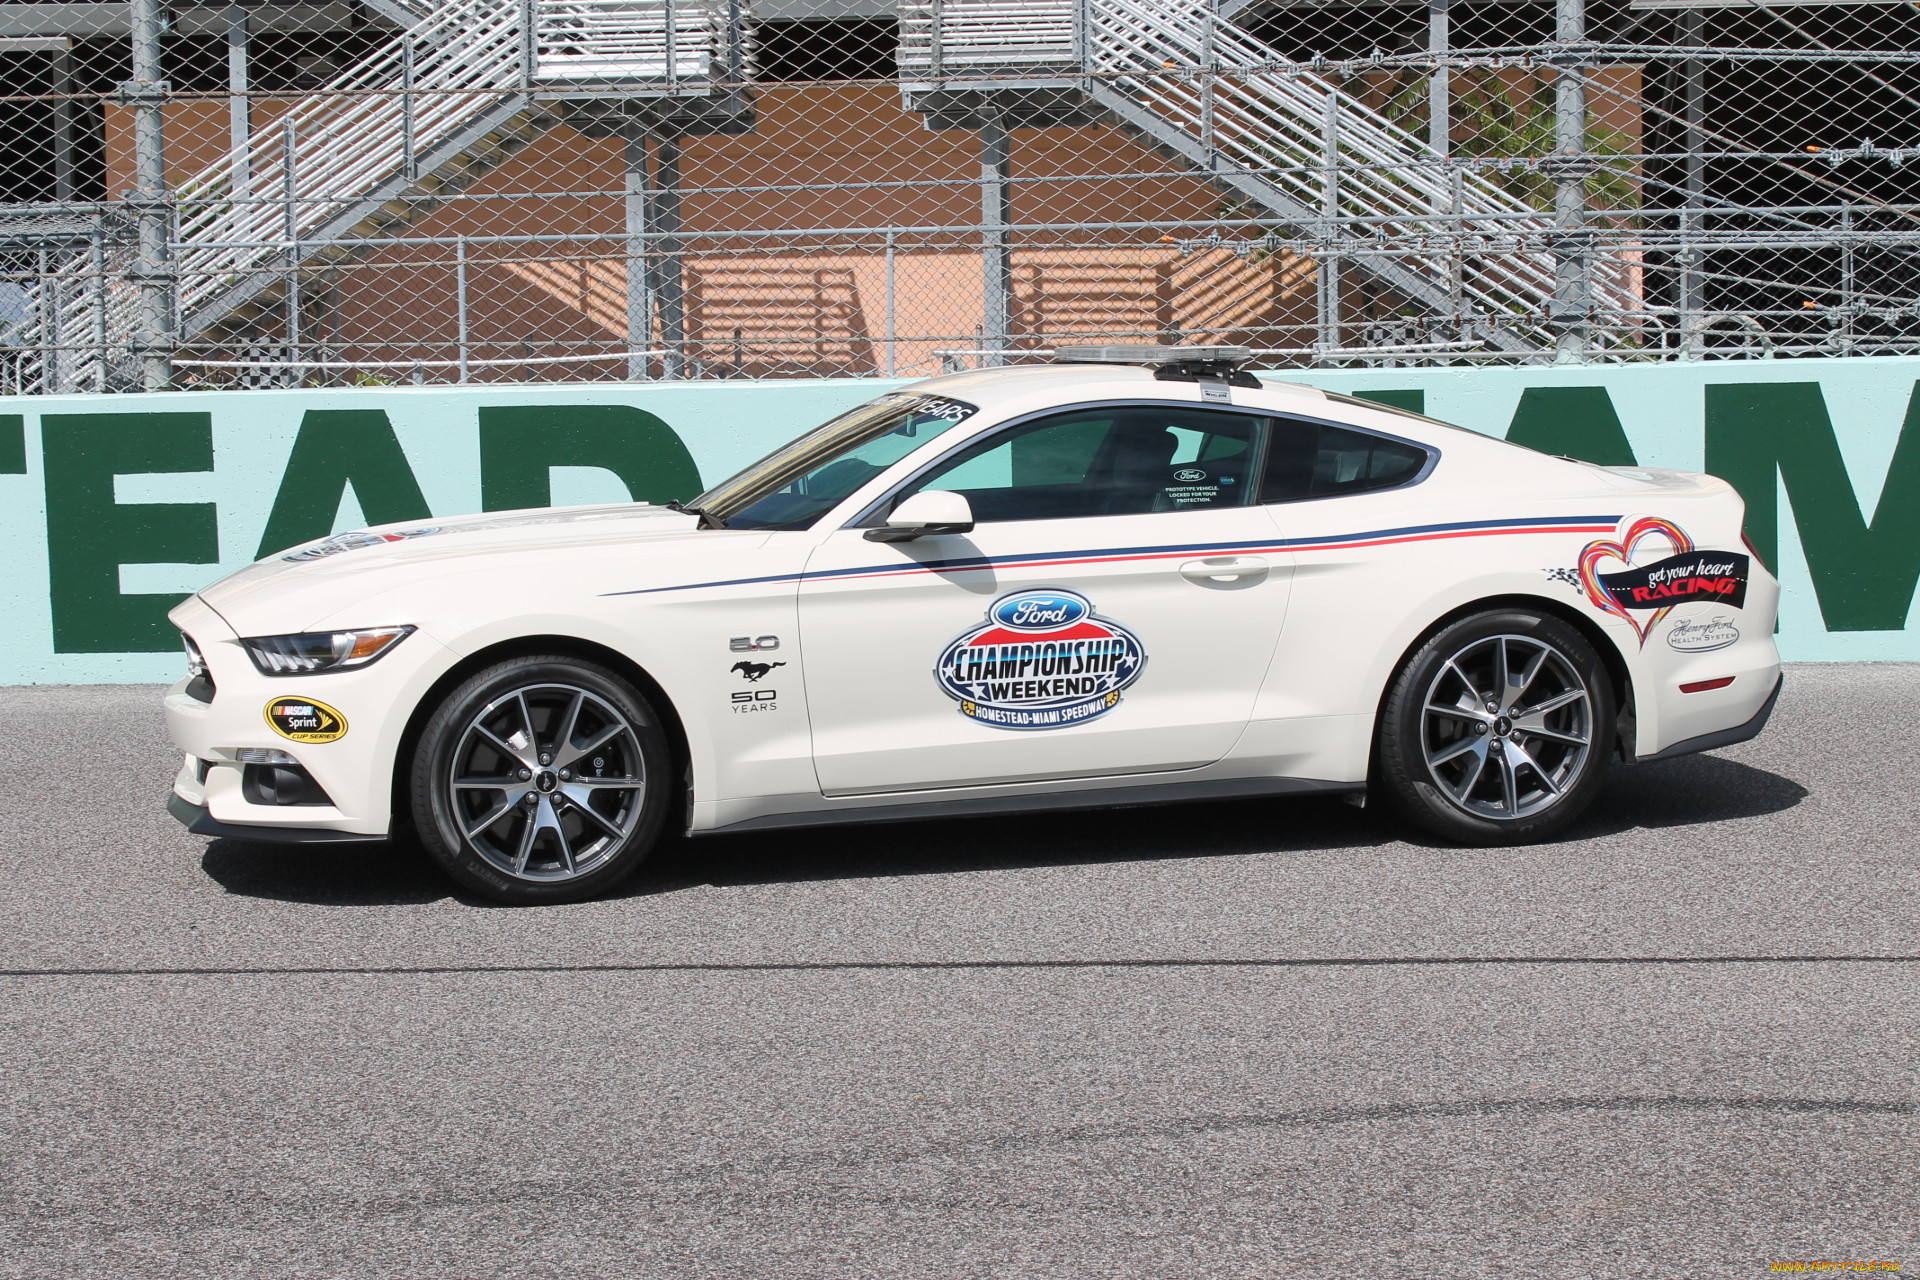 , mustang, car, pace, nascar, 50, years, gt, ford, 2015, 